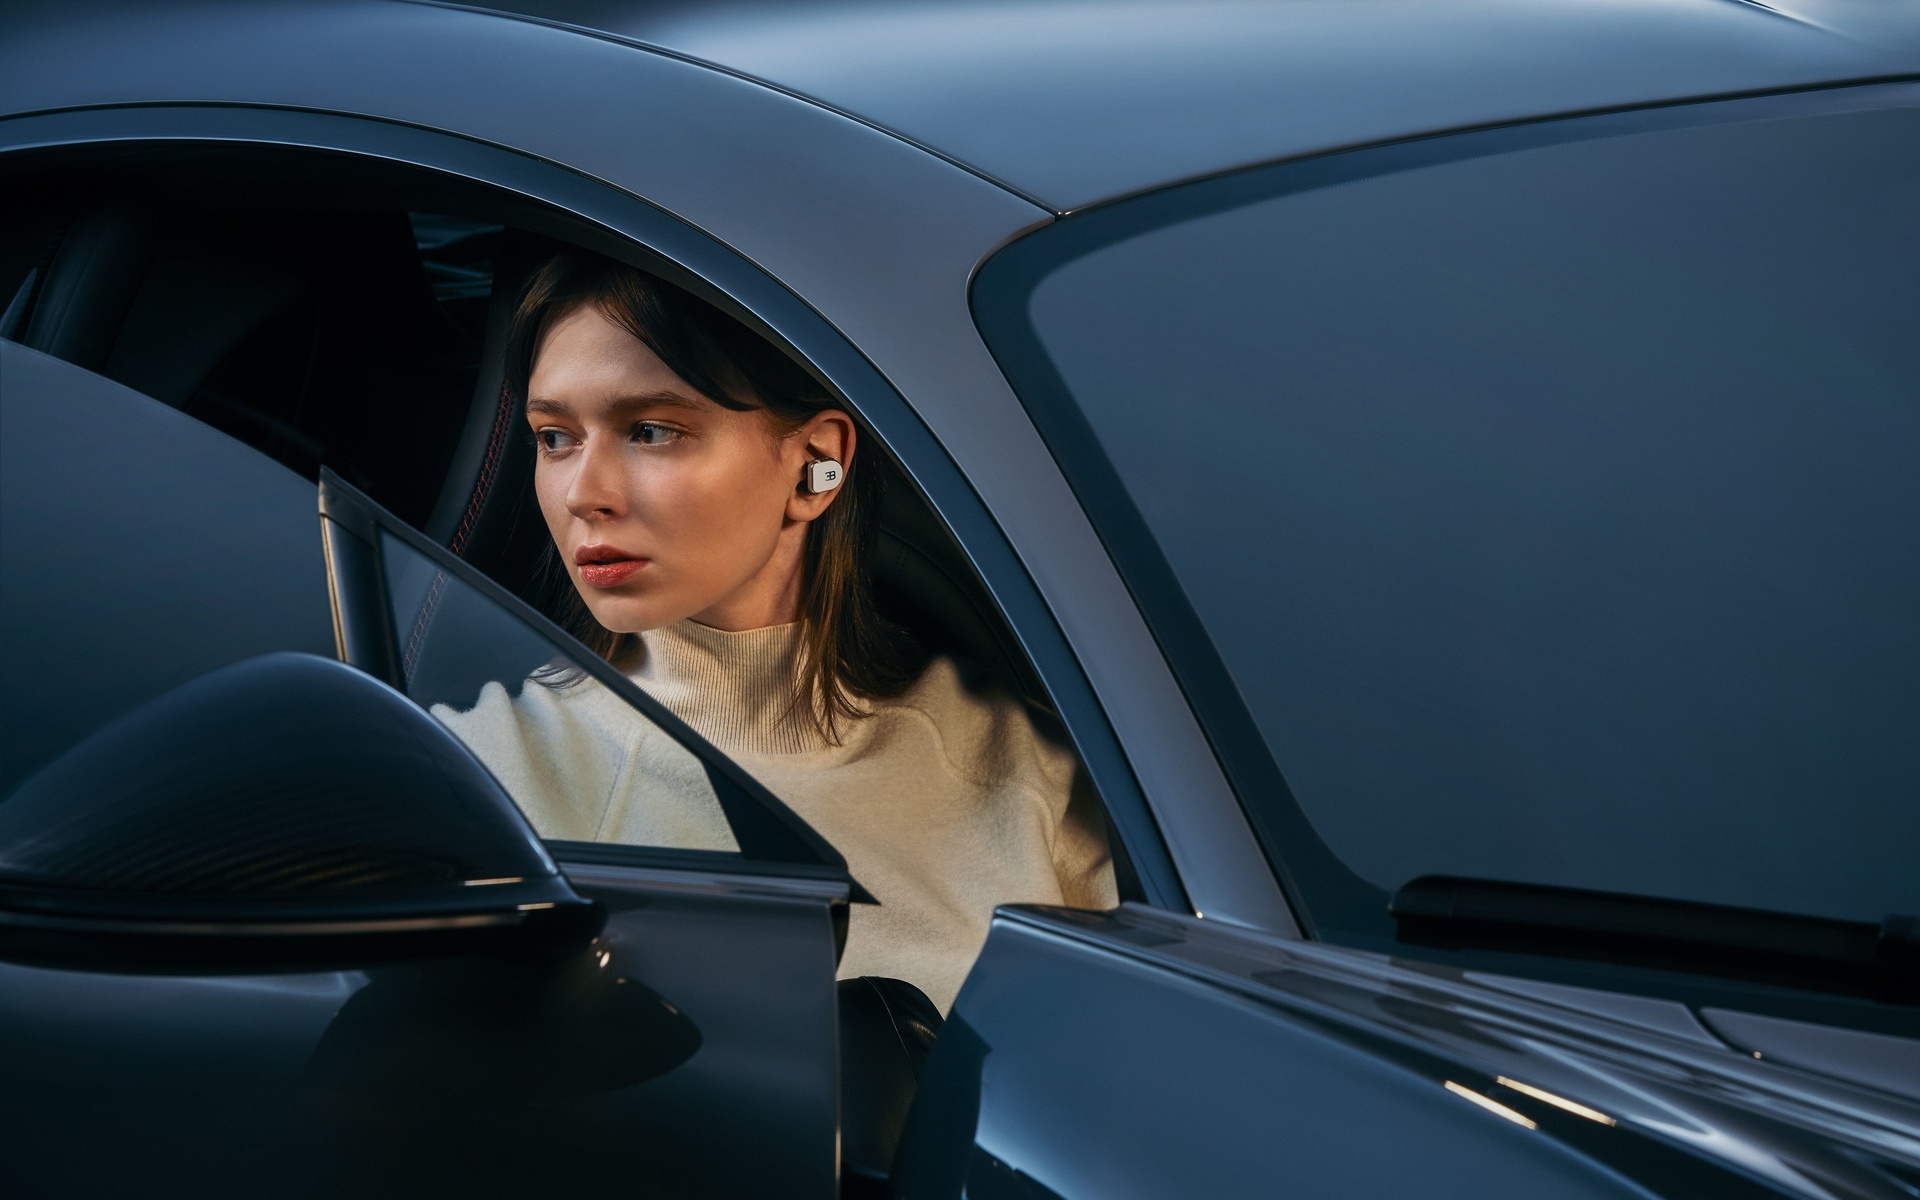 bugatti, new collection of personal sound accessories, master and dynamic